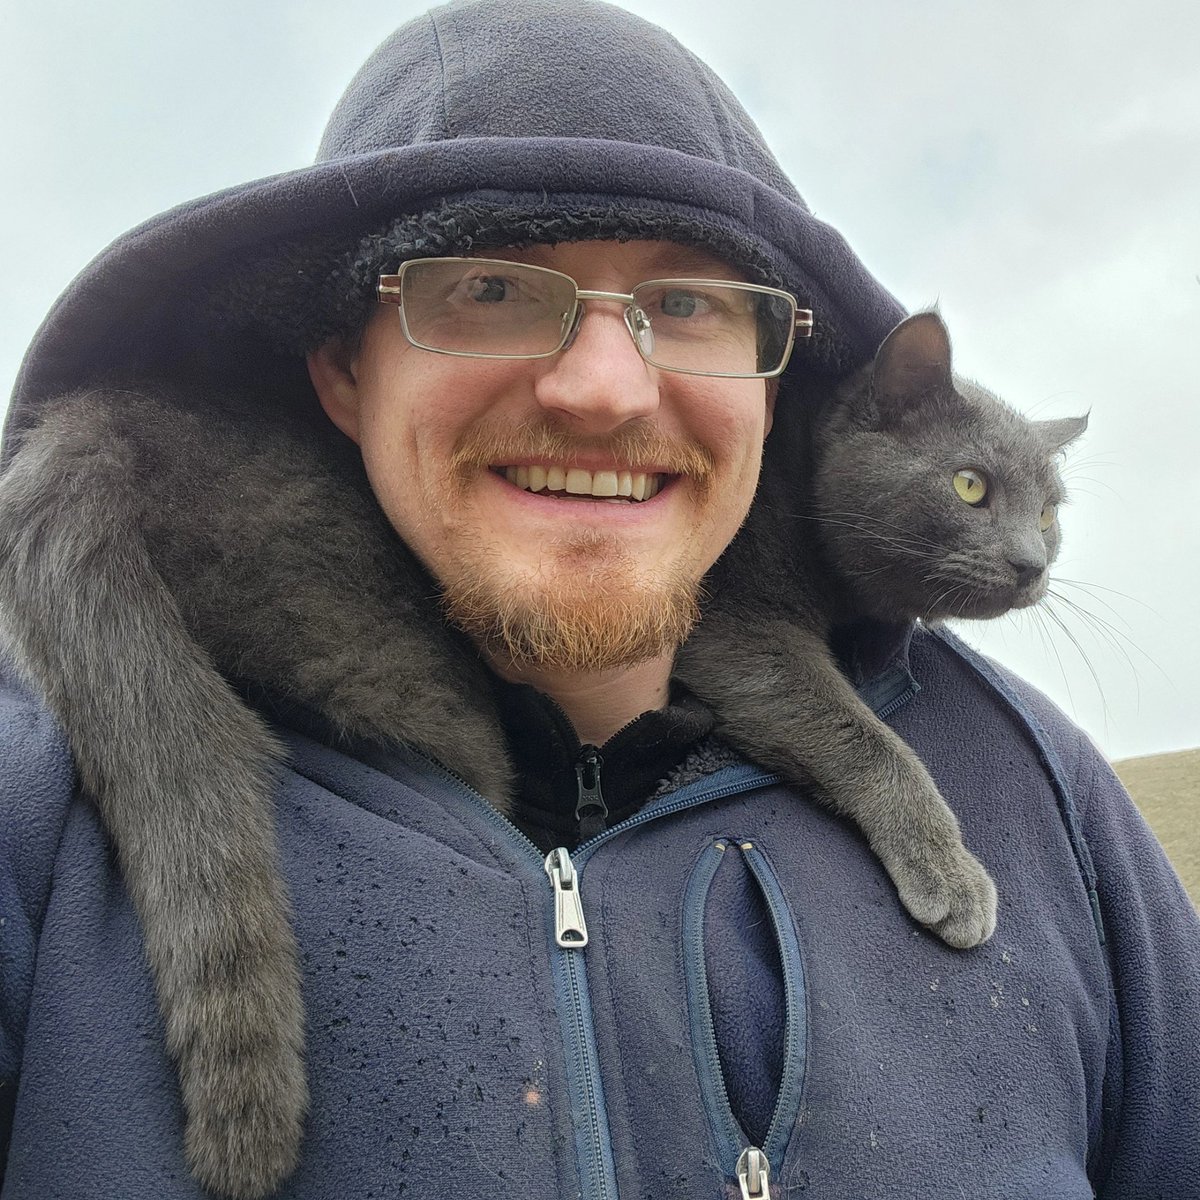 He stays dry and my neck stays warm.